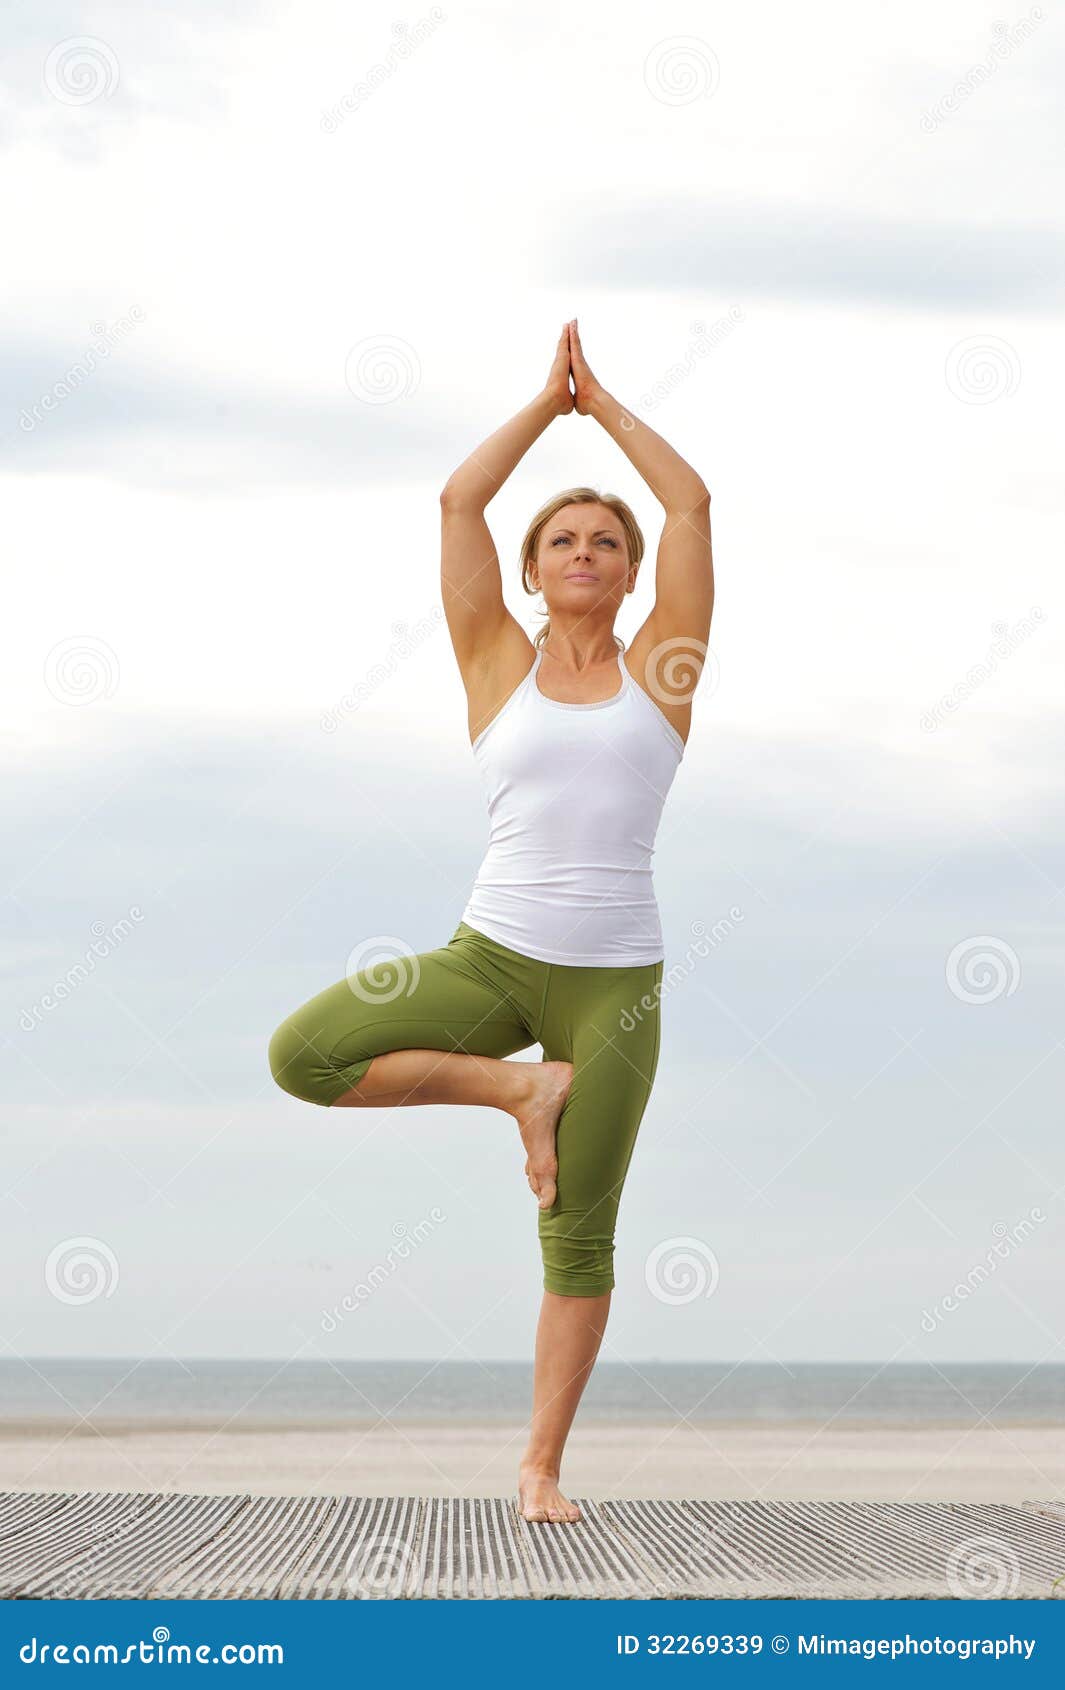 1 644 Leg One Standing Yoga Photos Free Royalty Free Stock Photos From Dreamstime